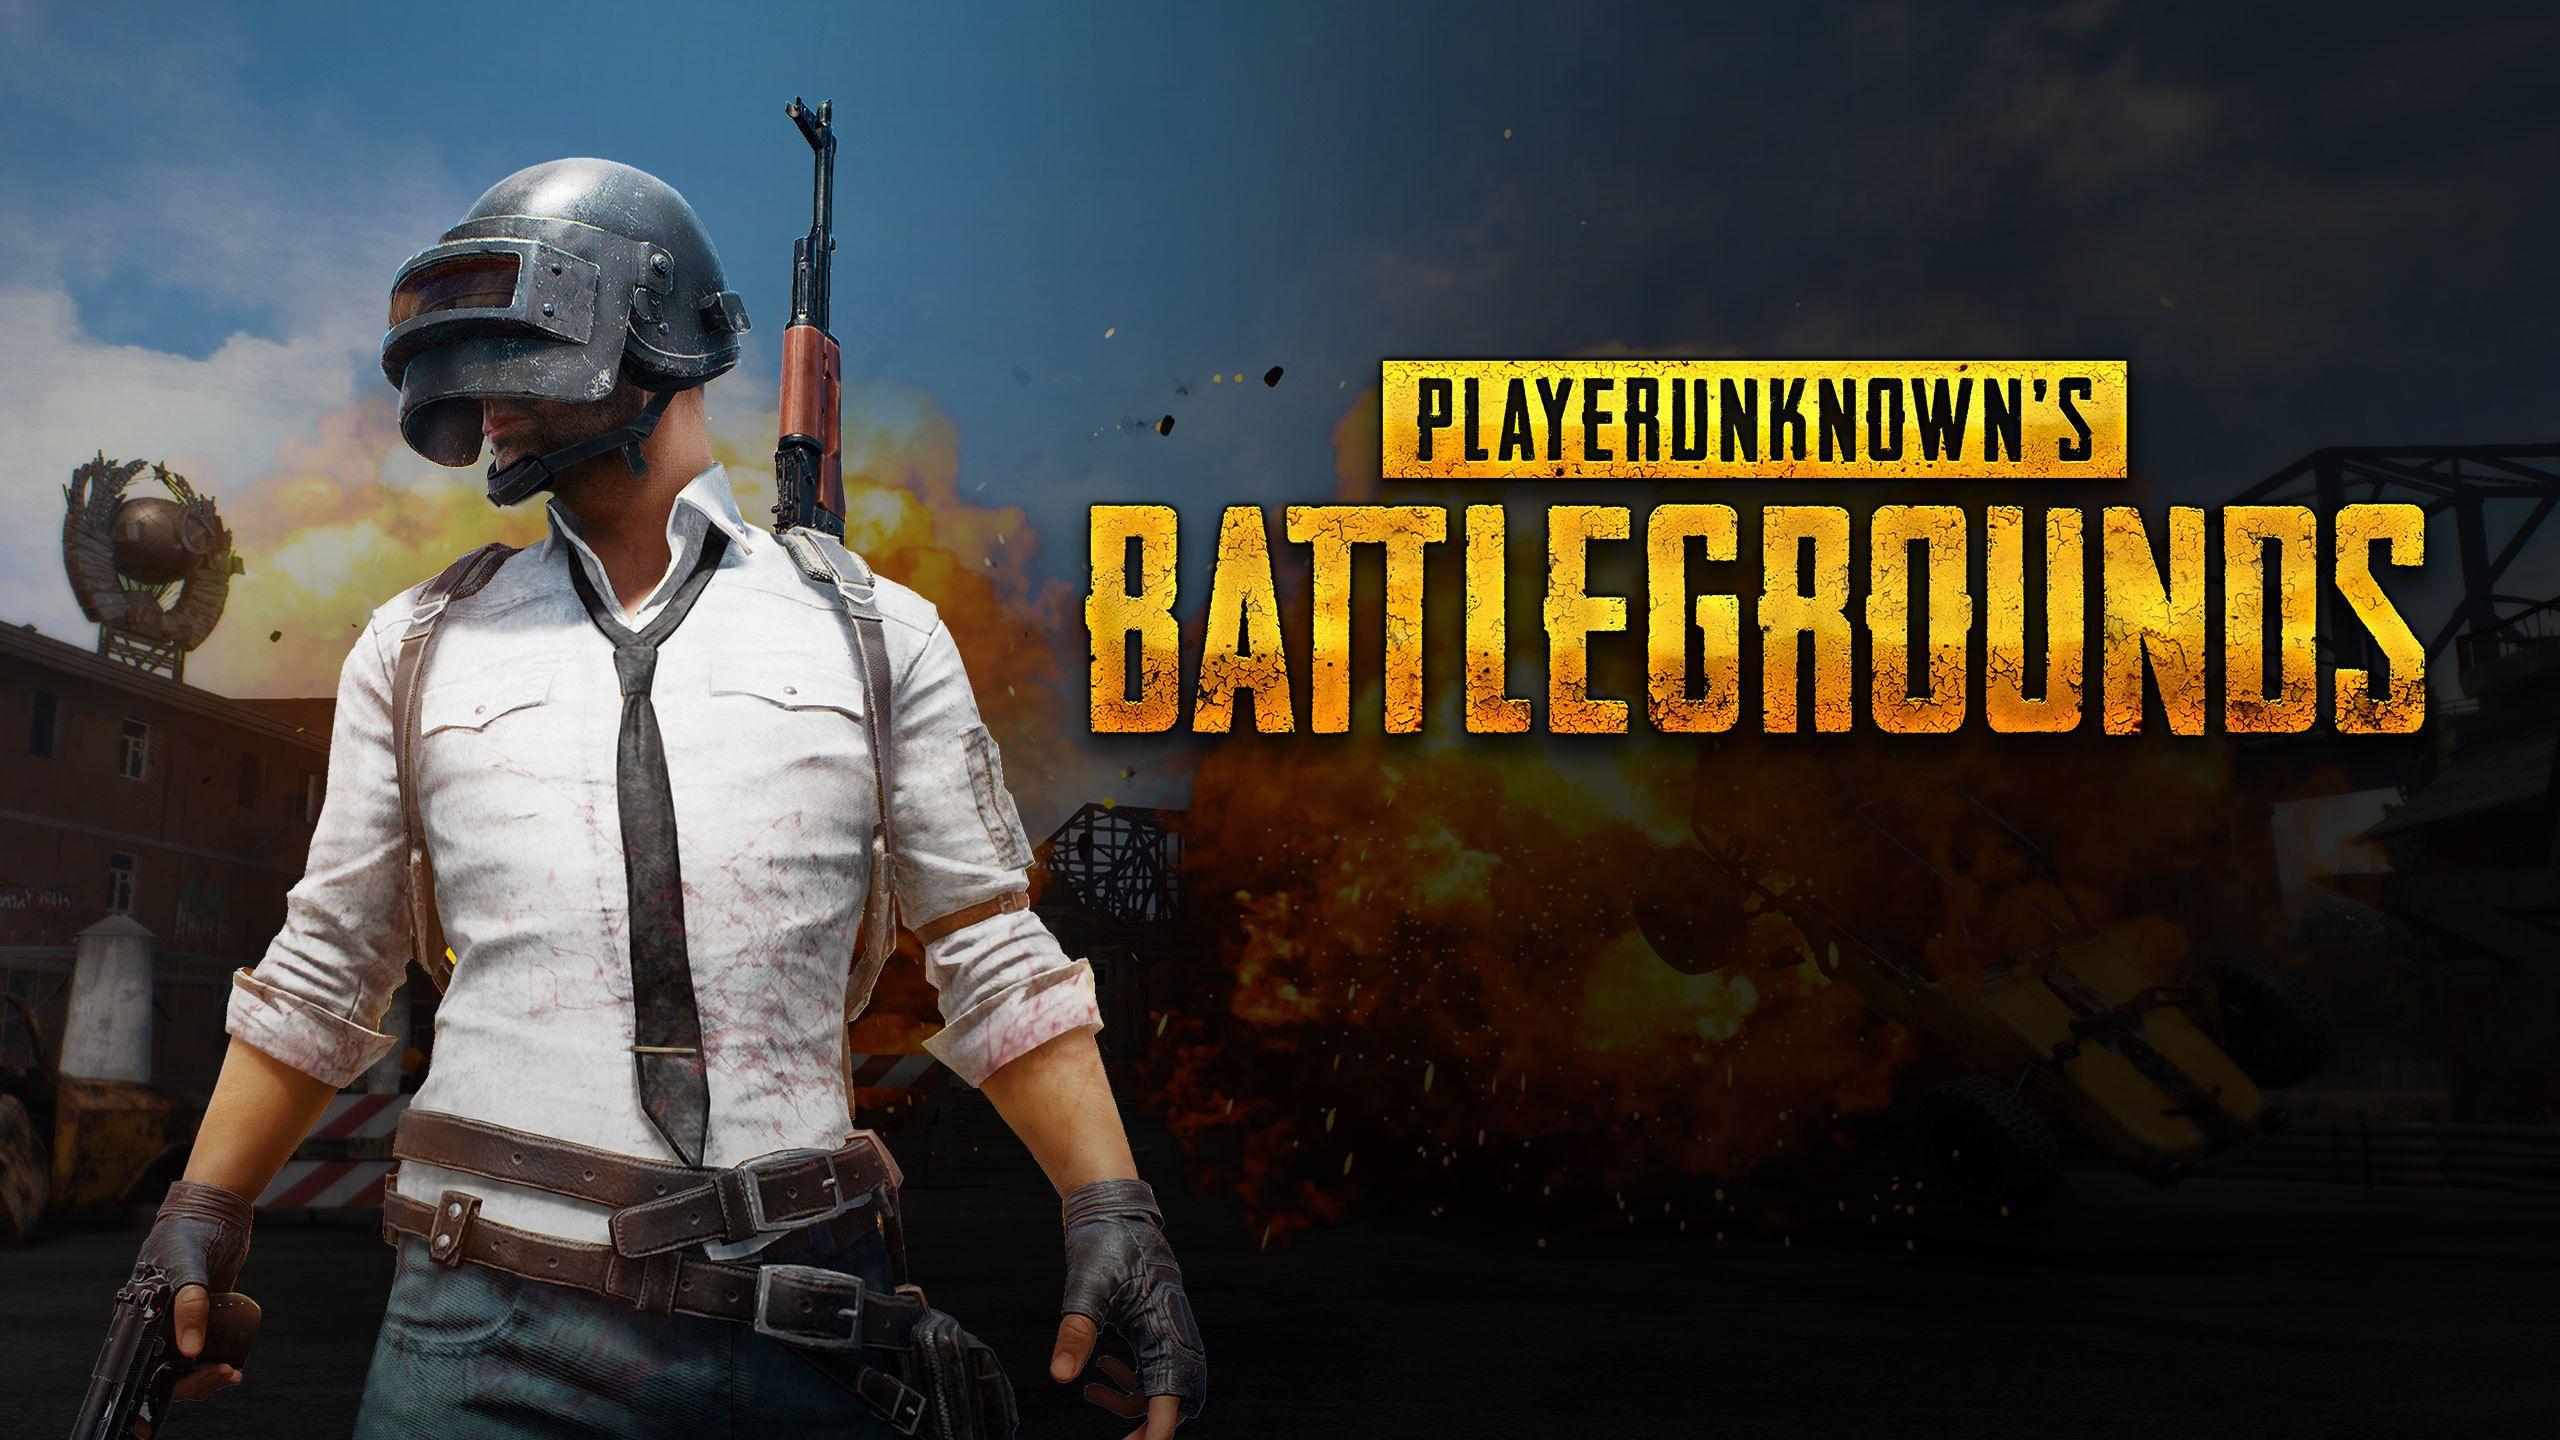 PUBG briefly surpassed Dota in concurrent players becoming the